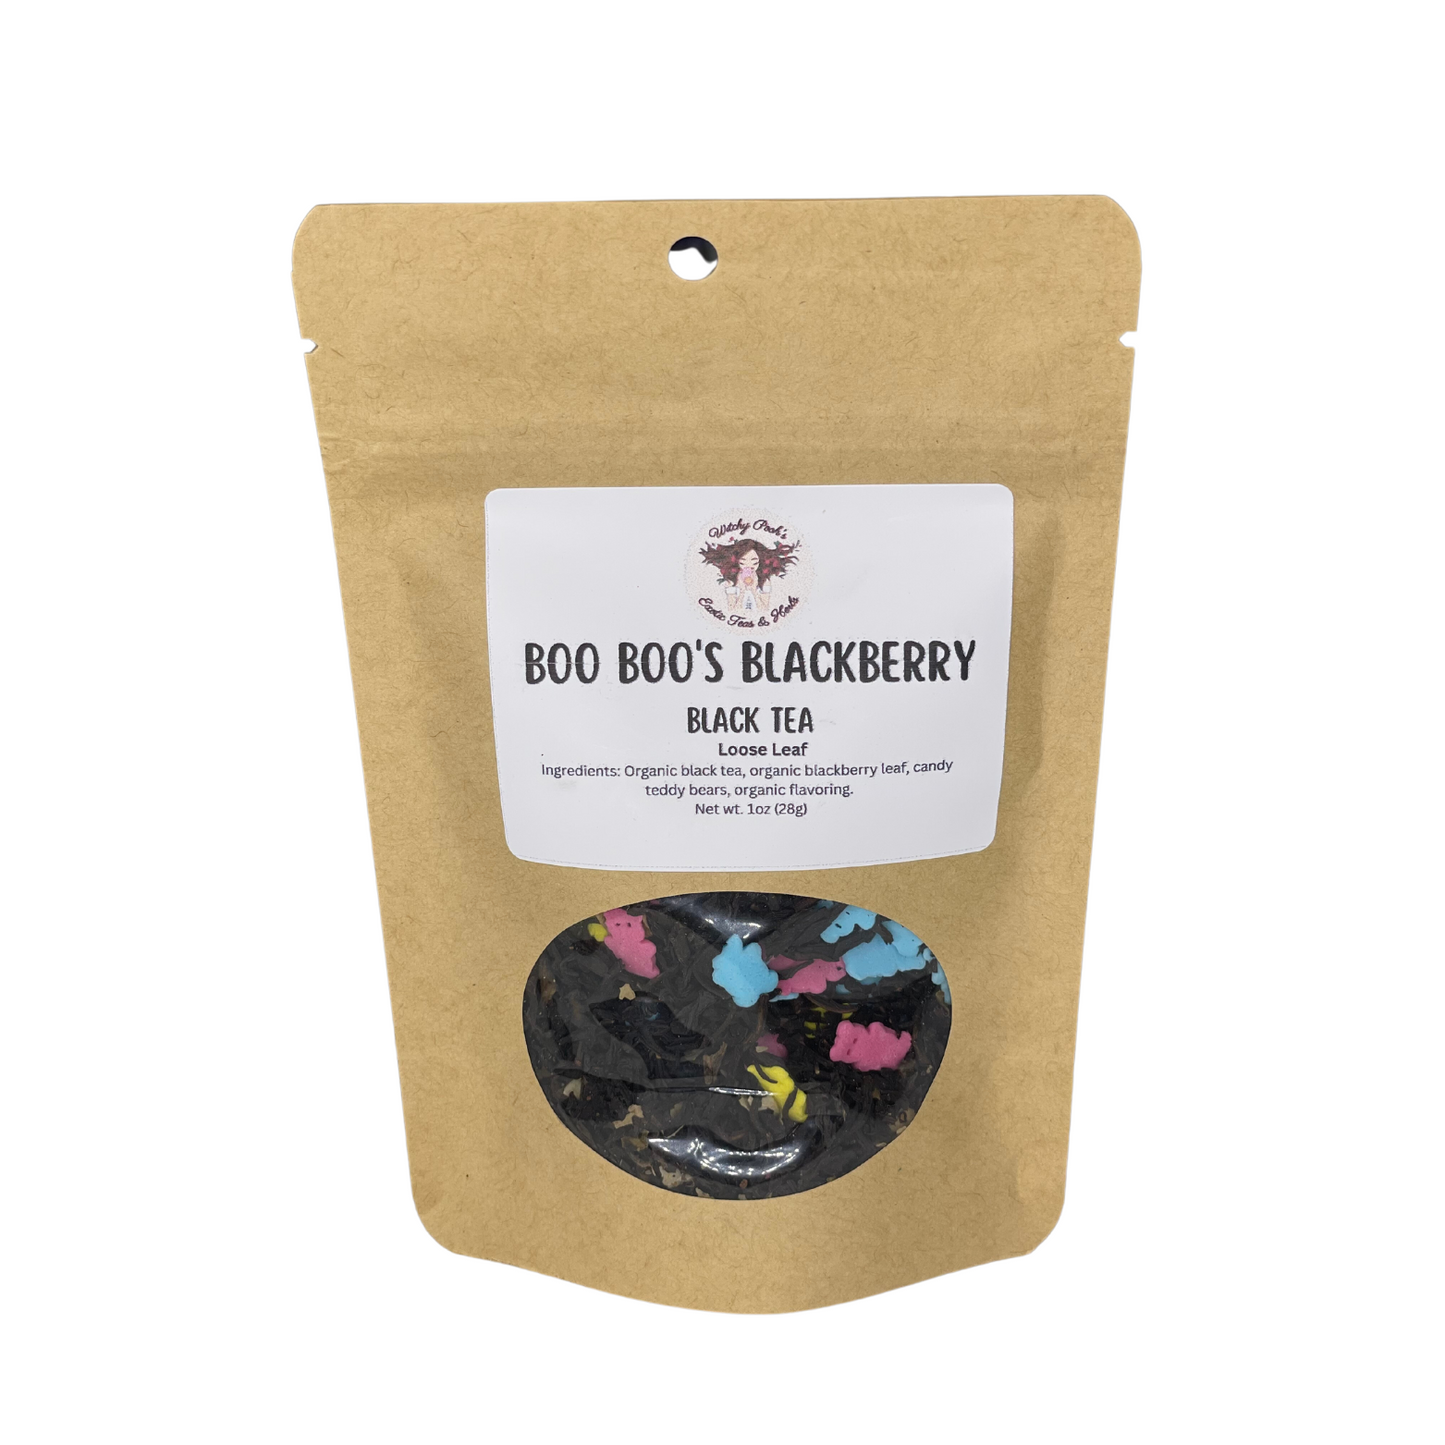 Witchy Pooh's Boo Boo's Blackberry Flavored Loose Leaf Black Tea with Candy Teddy Bears